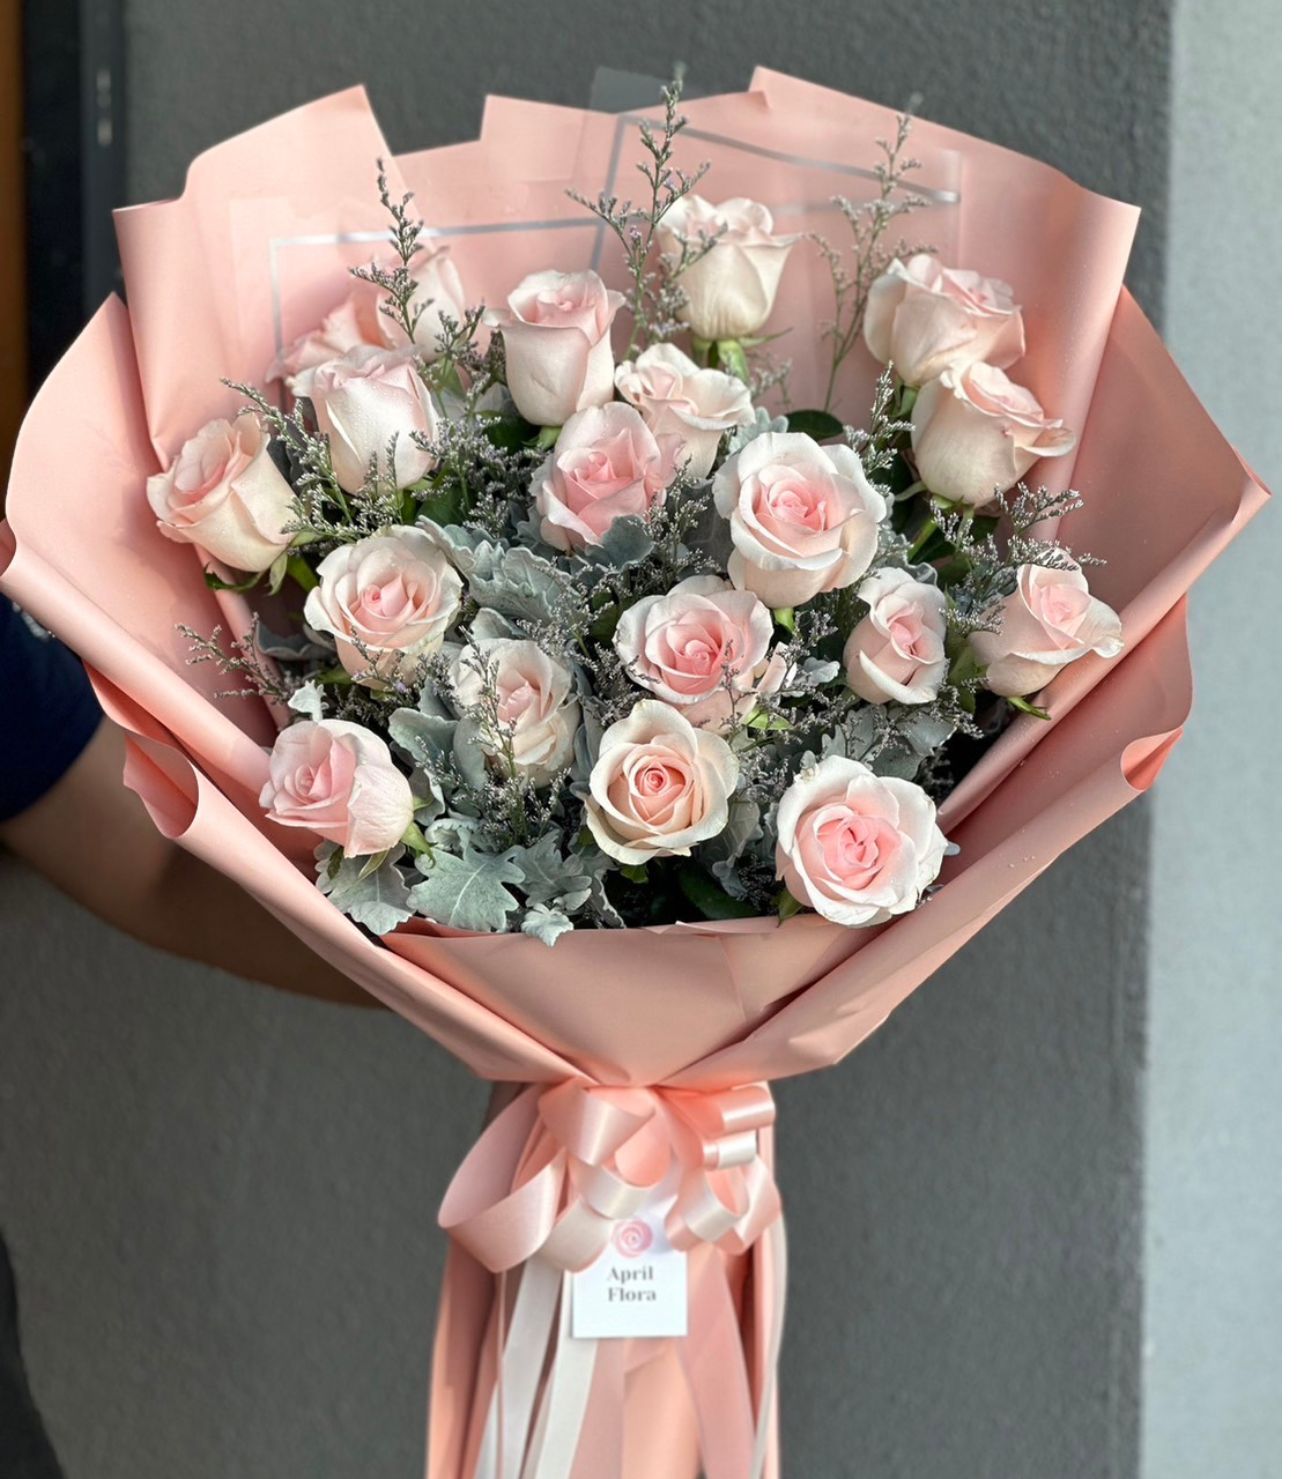 Bouquet Of 20 Pink Roses With Caspia - April Flora